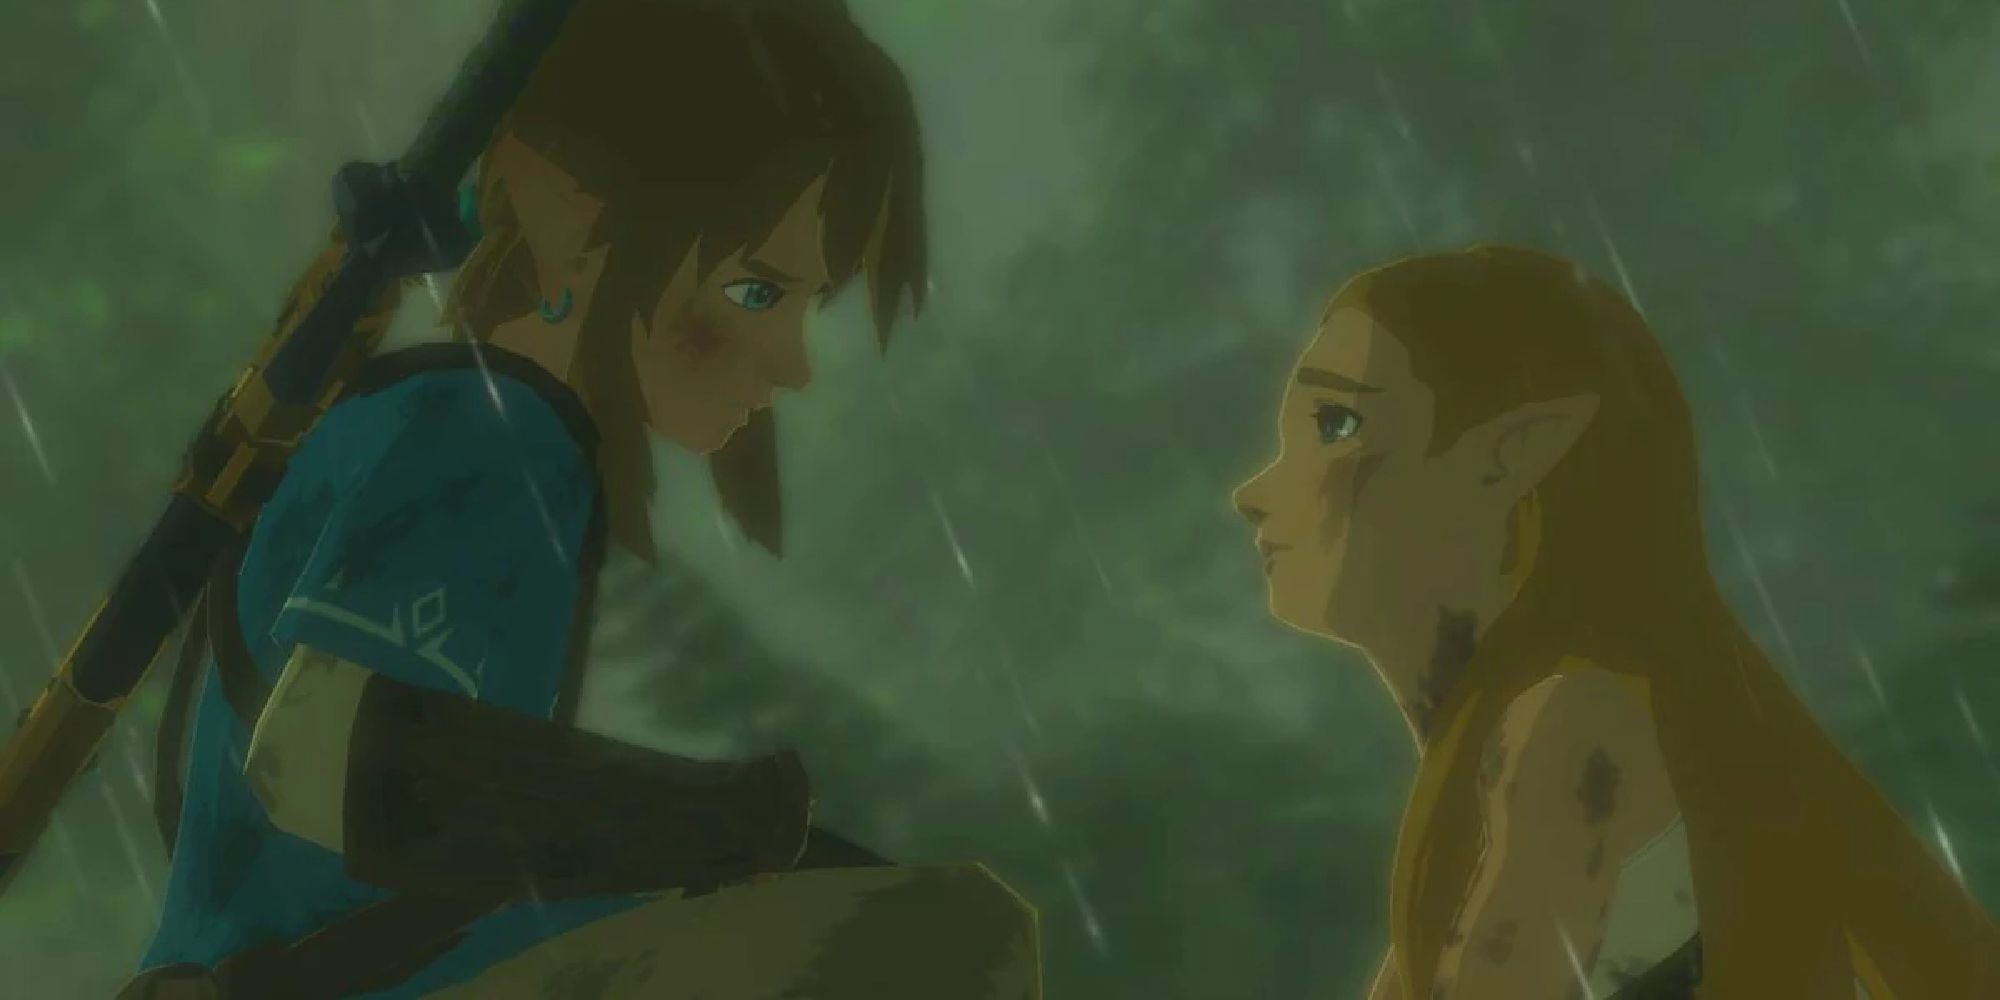 Zelda crying in the rain while staring at Link in the Captured Memory "Despair"